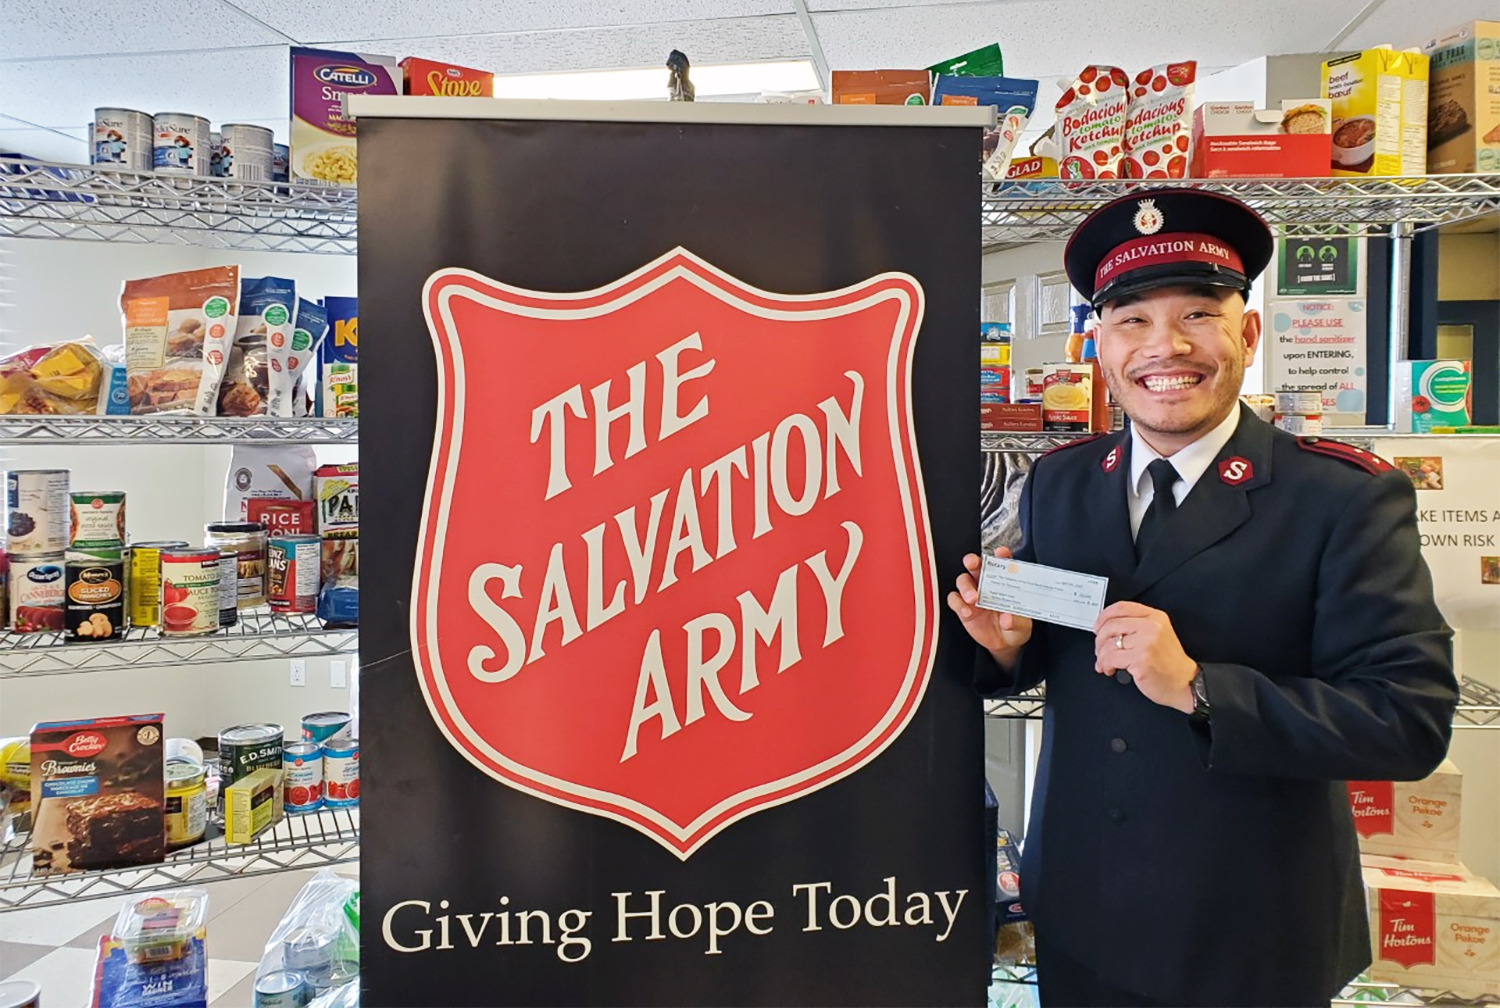 Captain Peter Kim accepting a donation for the new student feeding program in Grande Prairie